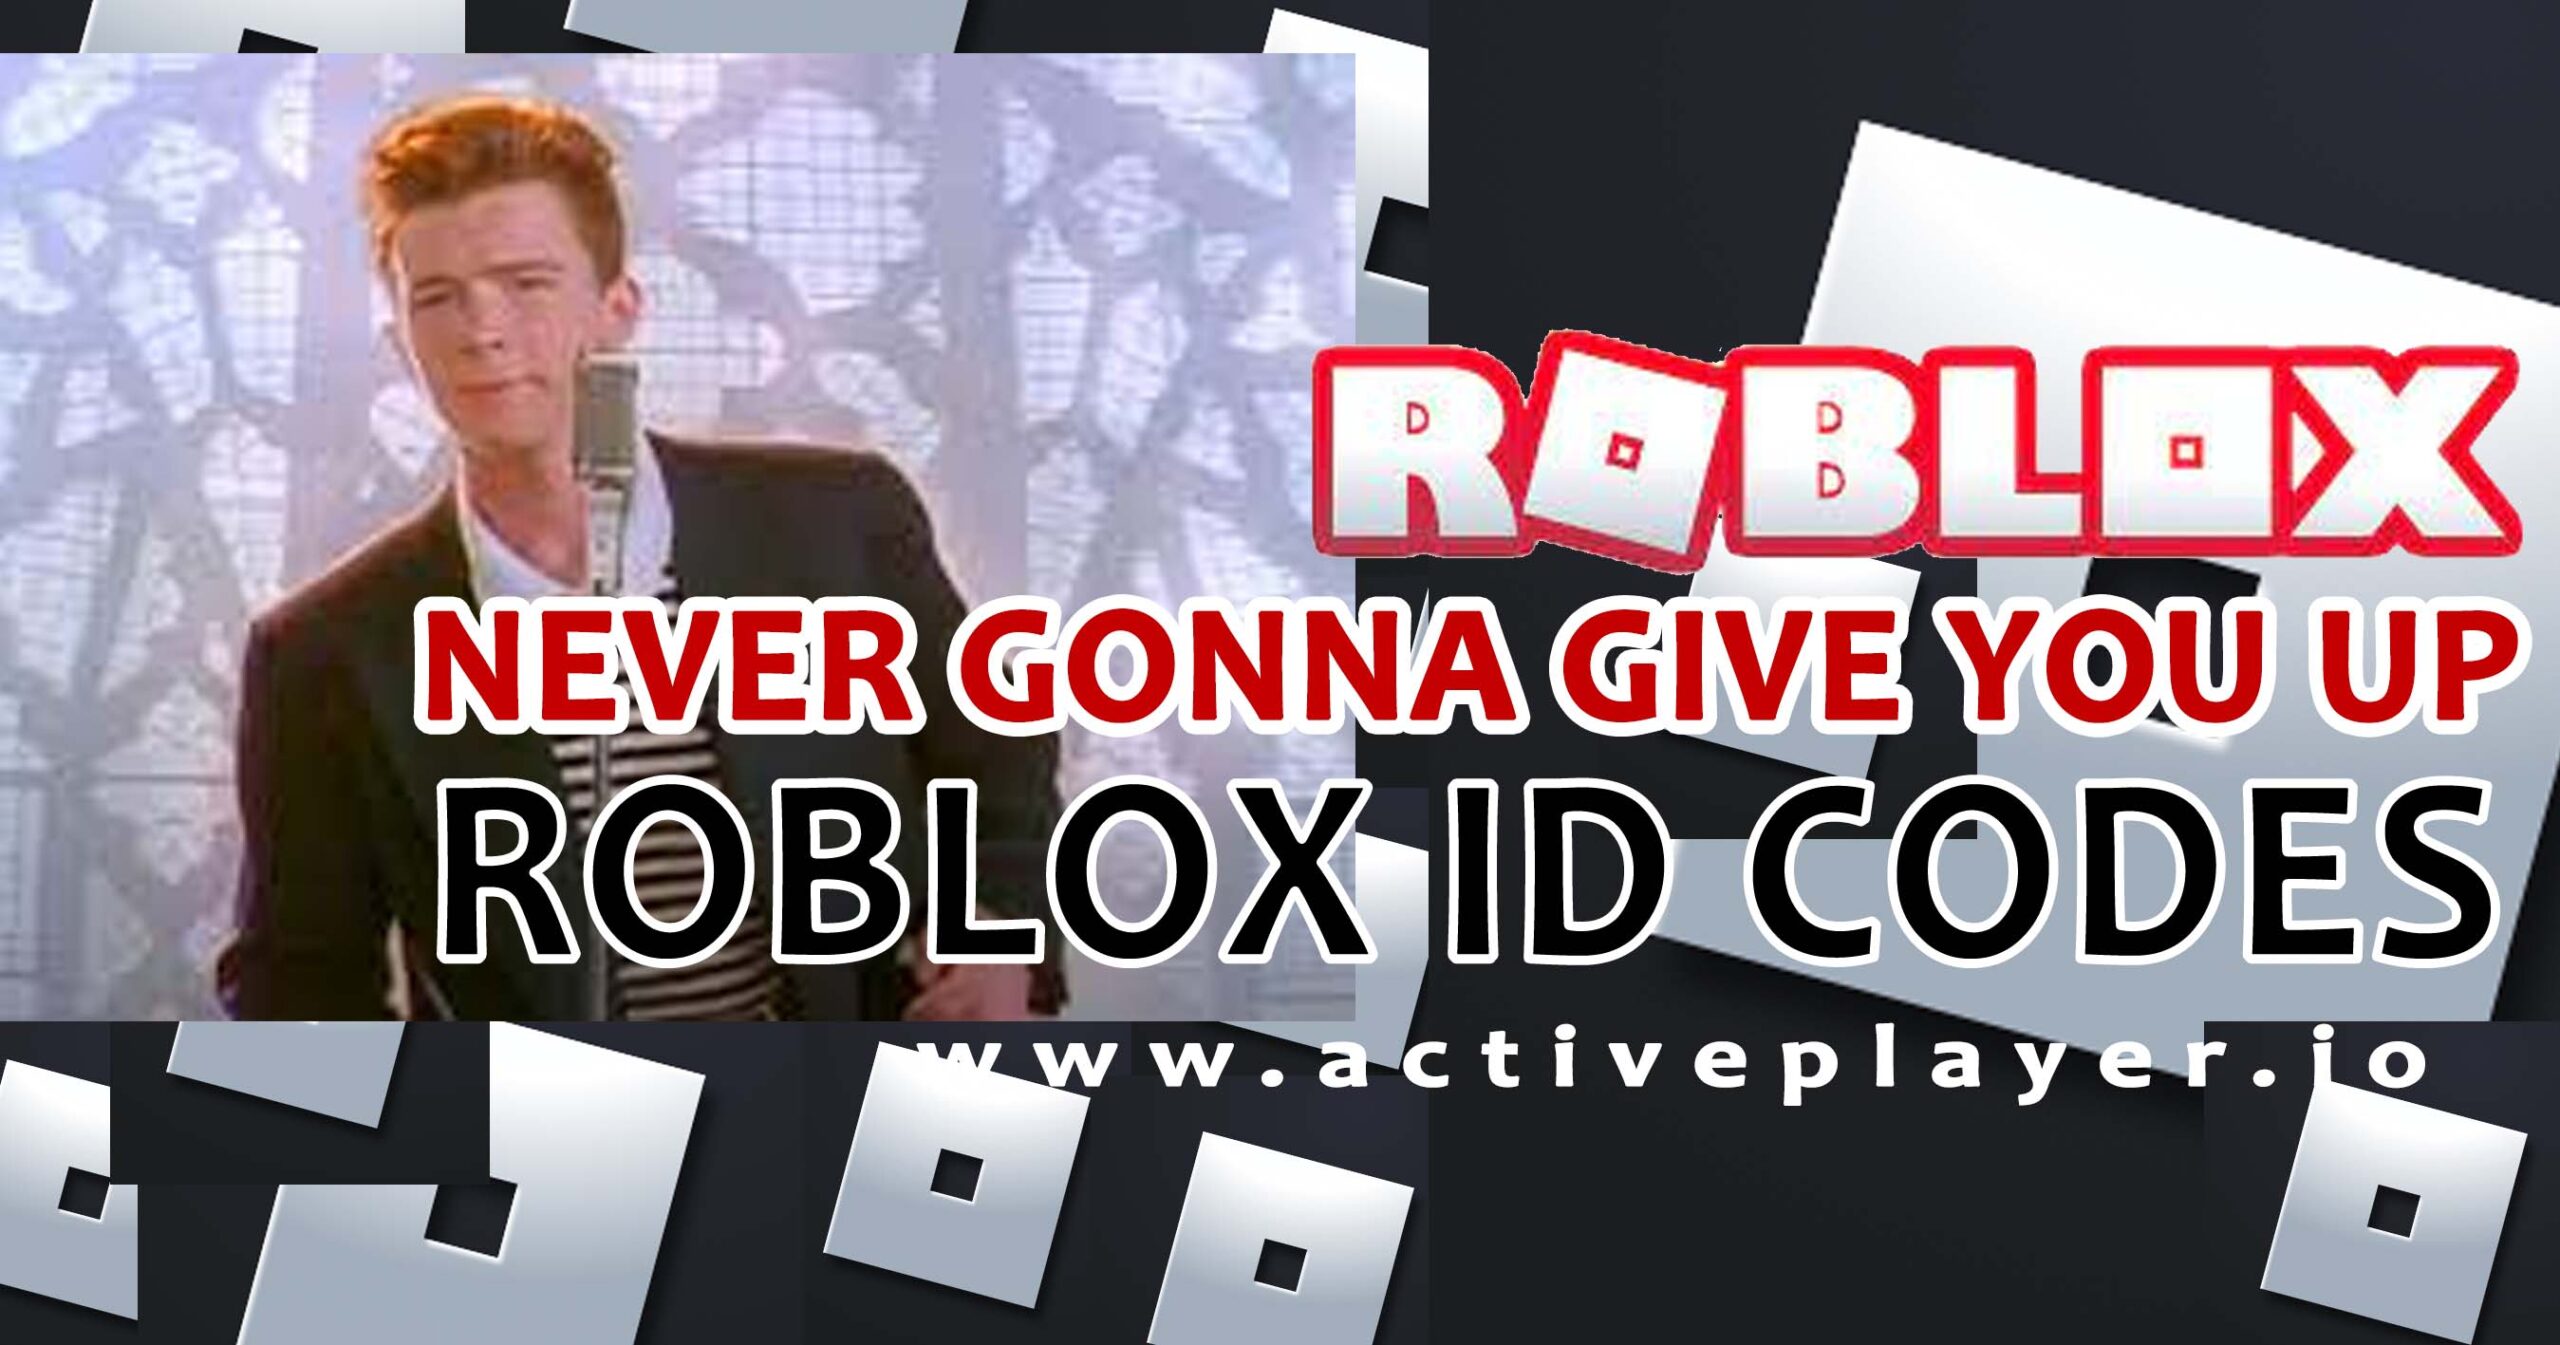 Song Id On Roblox GET] Never Gonna Give You Up Roblox ID Codes - The Game Statistics  Authority : ActivePlayer.io